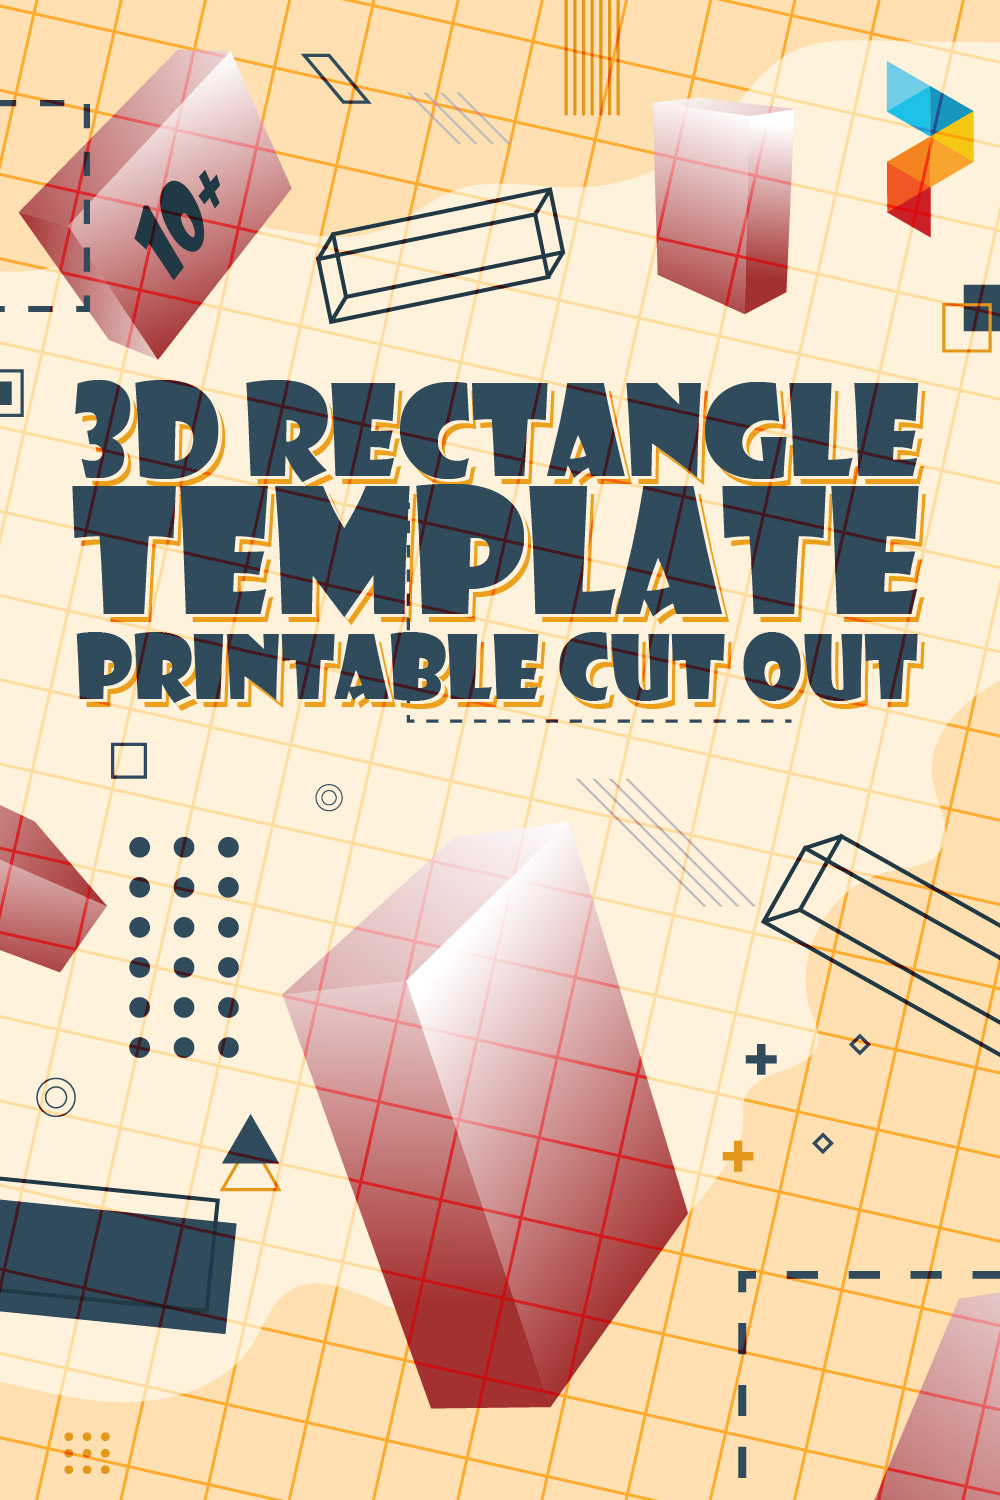 3D Rectangle Template Printable Cut Out